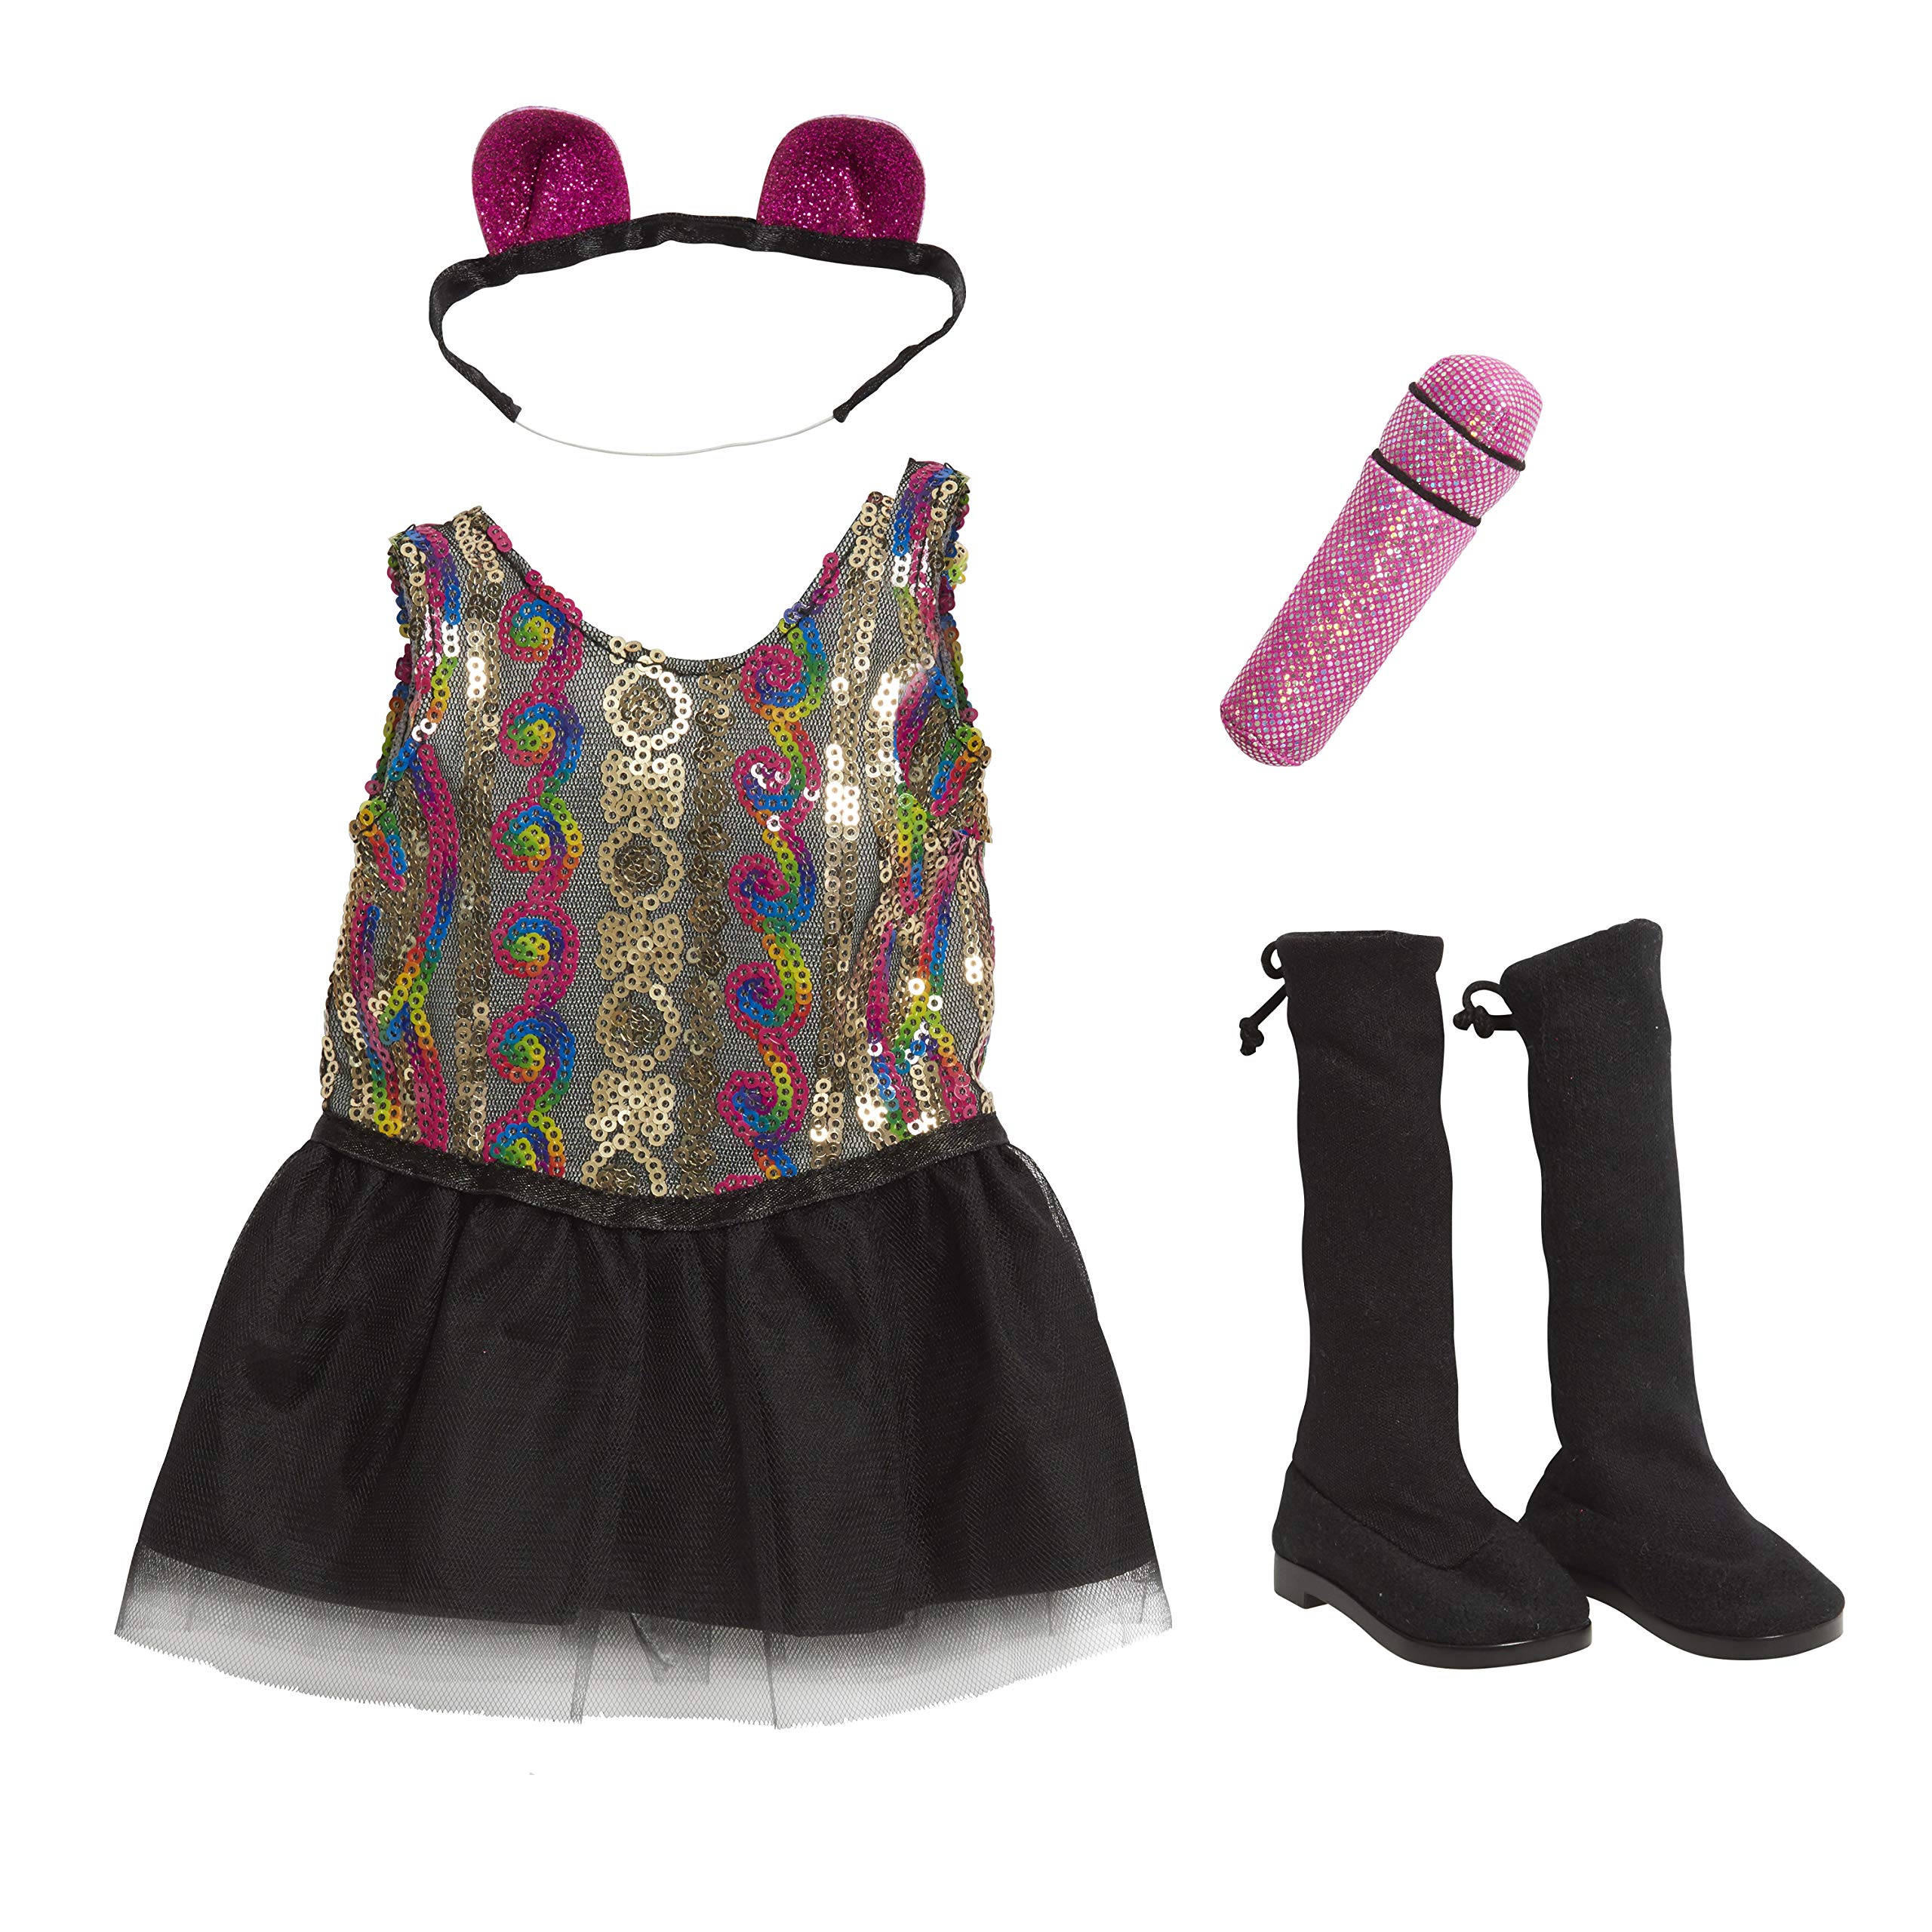 Journey Girls 18" Doll Fashion Set Sequin Pop-Star Dress, Kids Toys for Ages 6 Up by Just Play